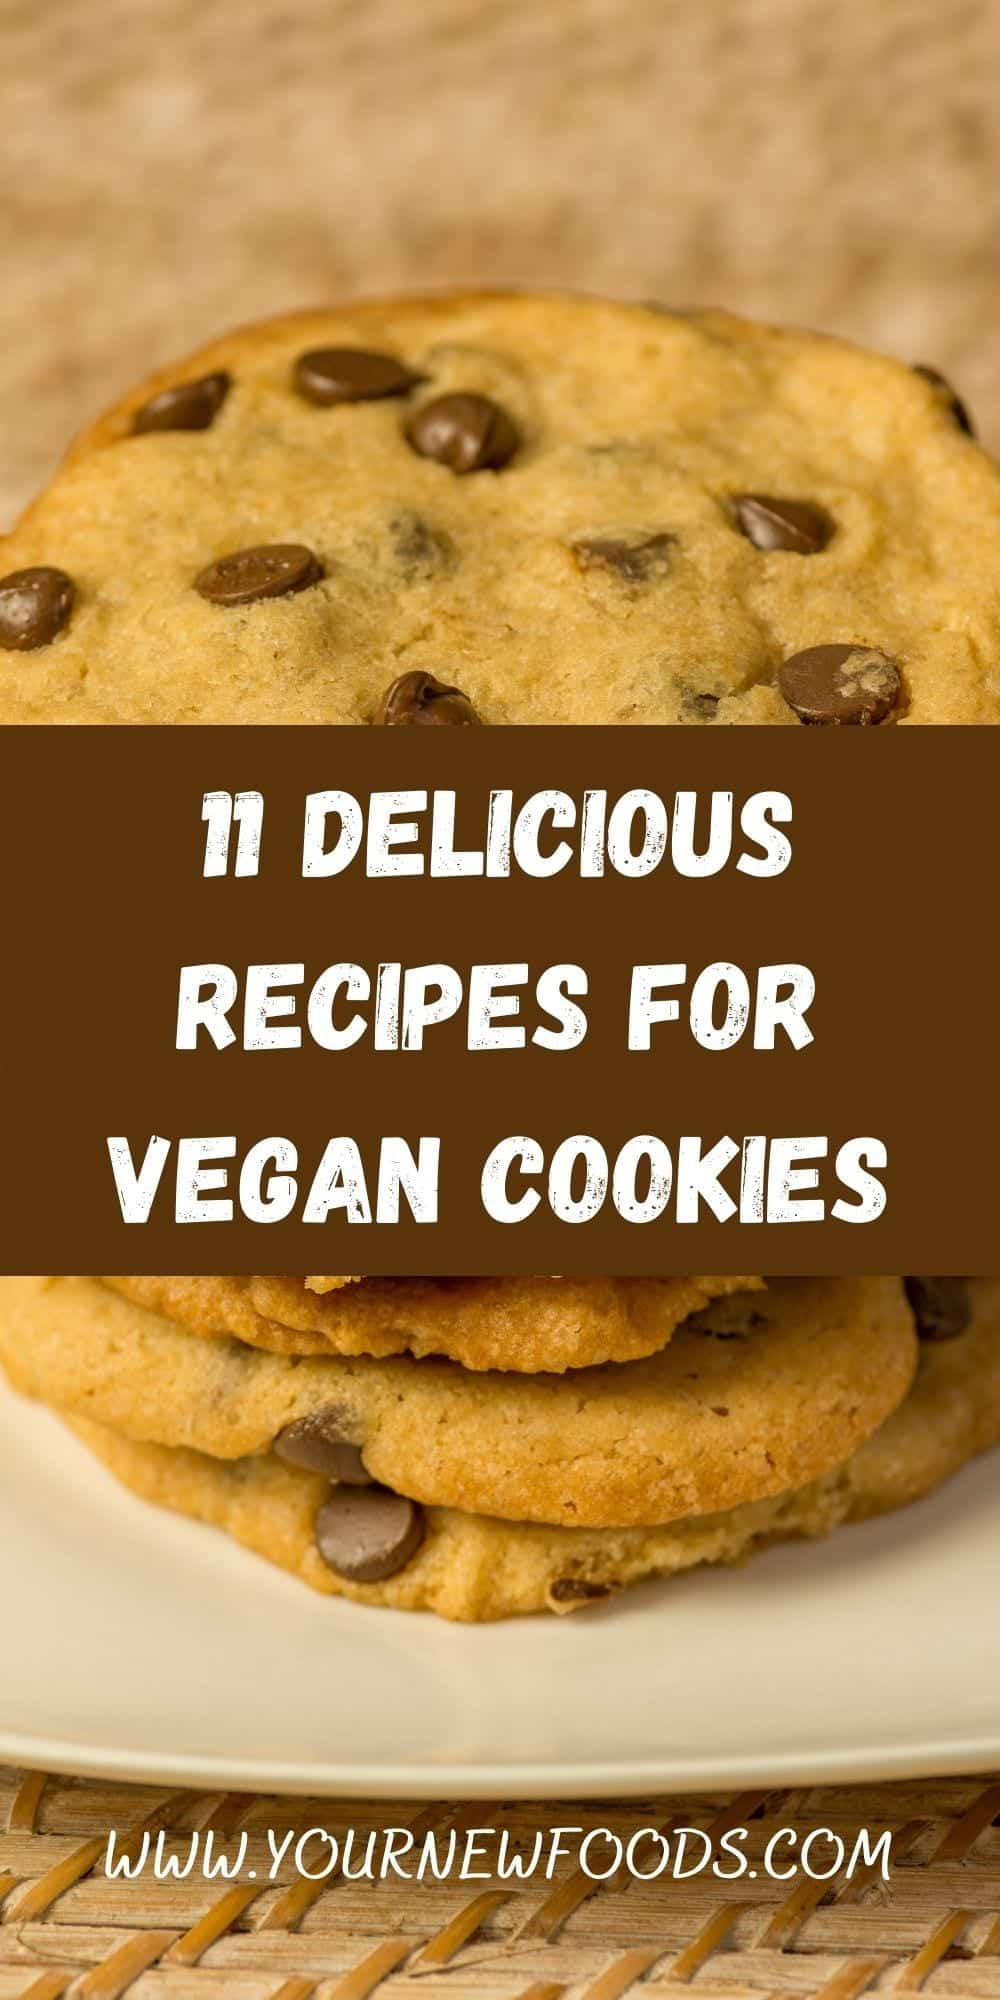 Delicious Recipes For Vegan Cookies with cookies stacked on top of each other on a white plate